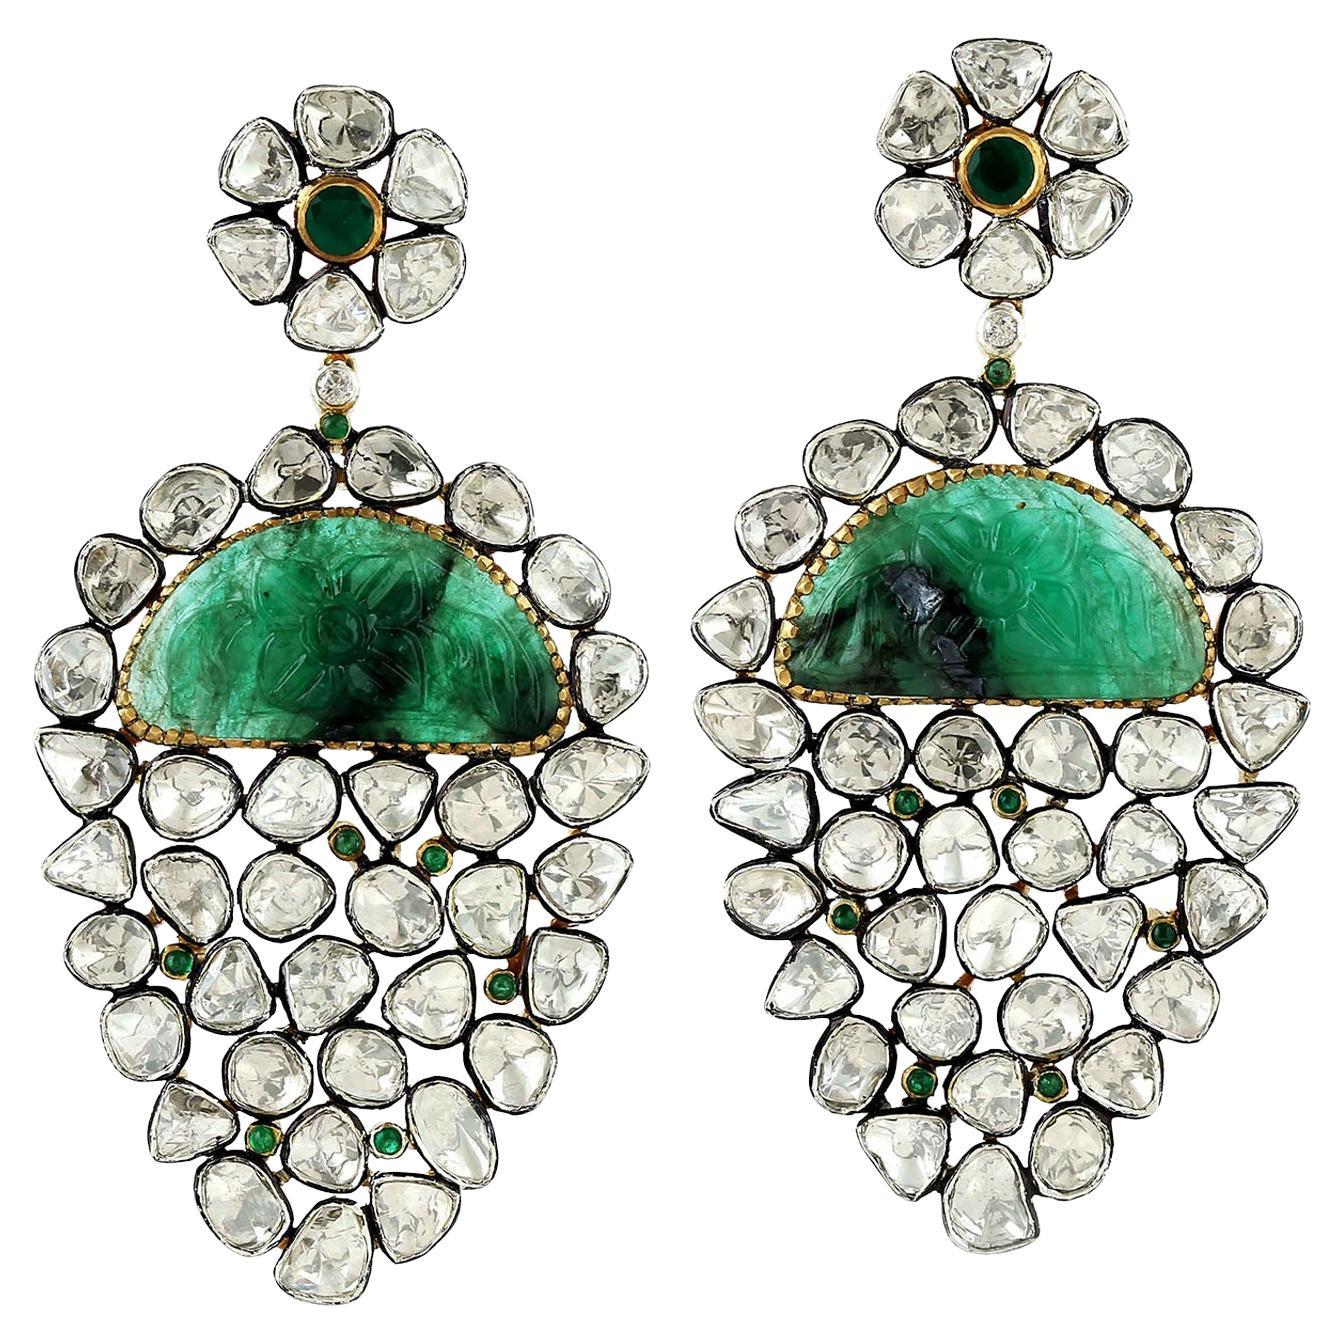 15.66ct Rose Cut Diamonds Earrings With Carved Emerald In 18k Gold & Silver